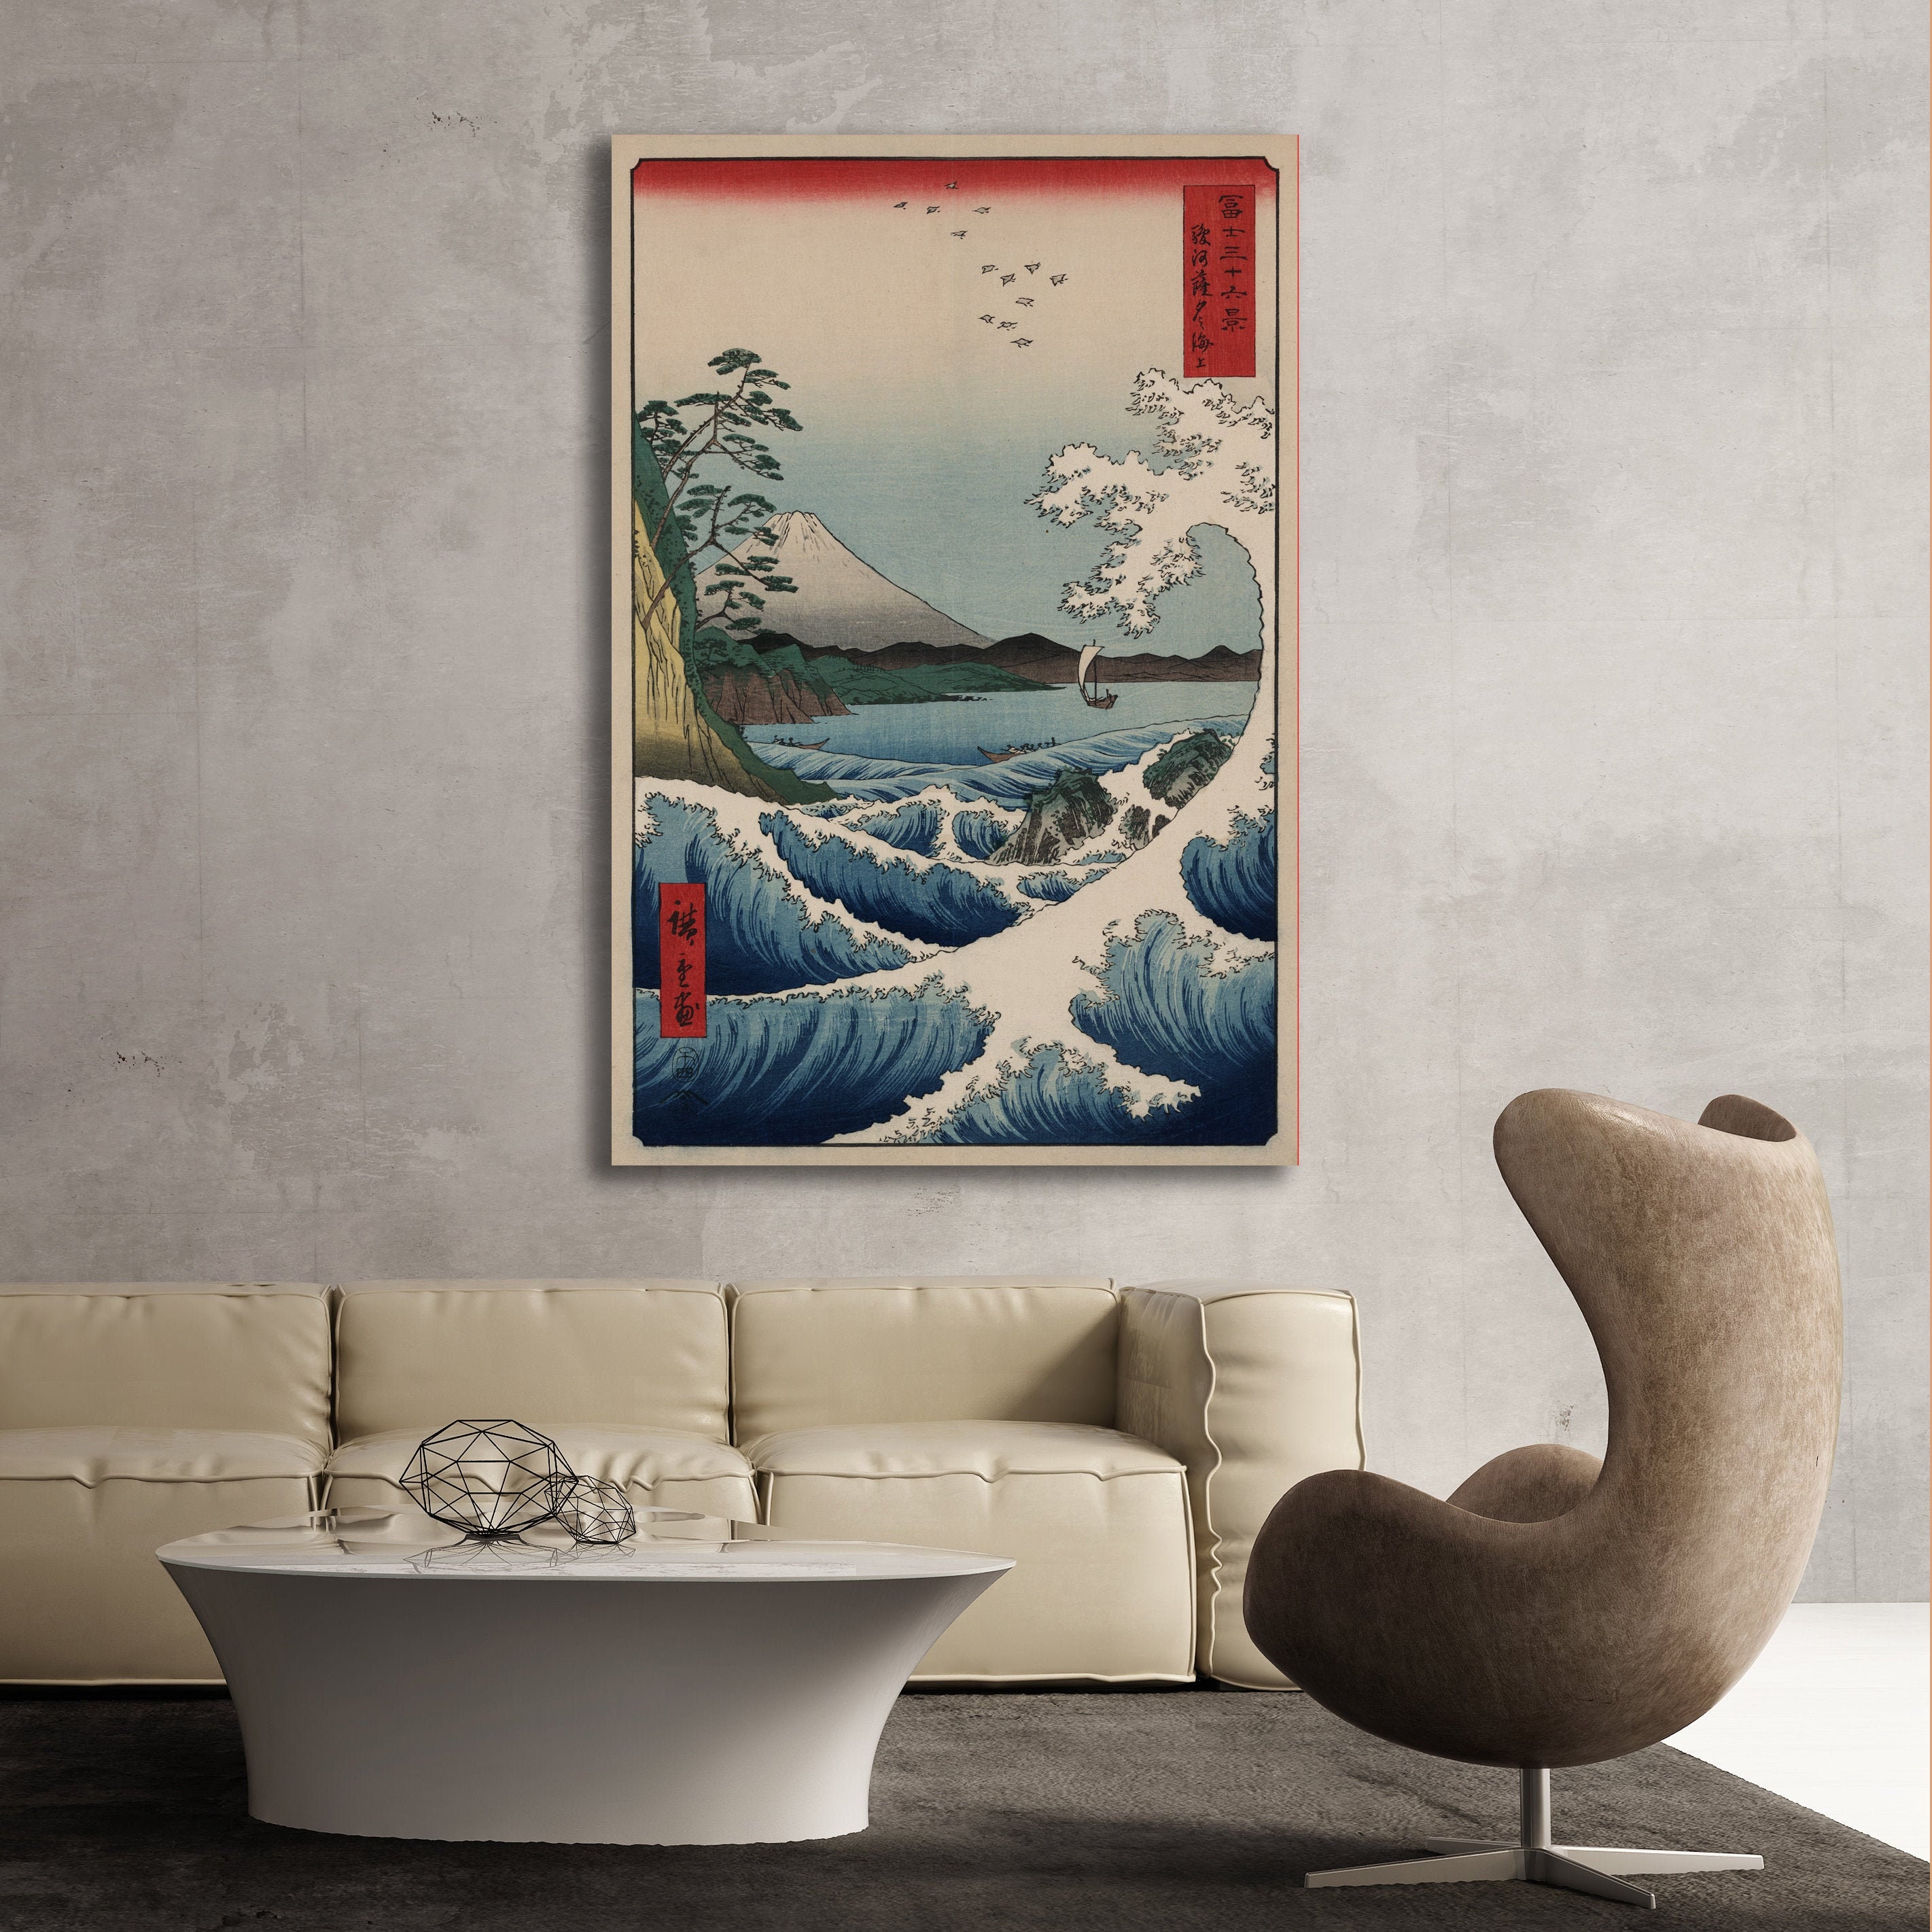 Antique Asian Old Japanese Wood Block Print Painting of Crashing Wave and Mt Fuji Printed on Fine Art Paper or Maple Wood